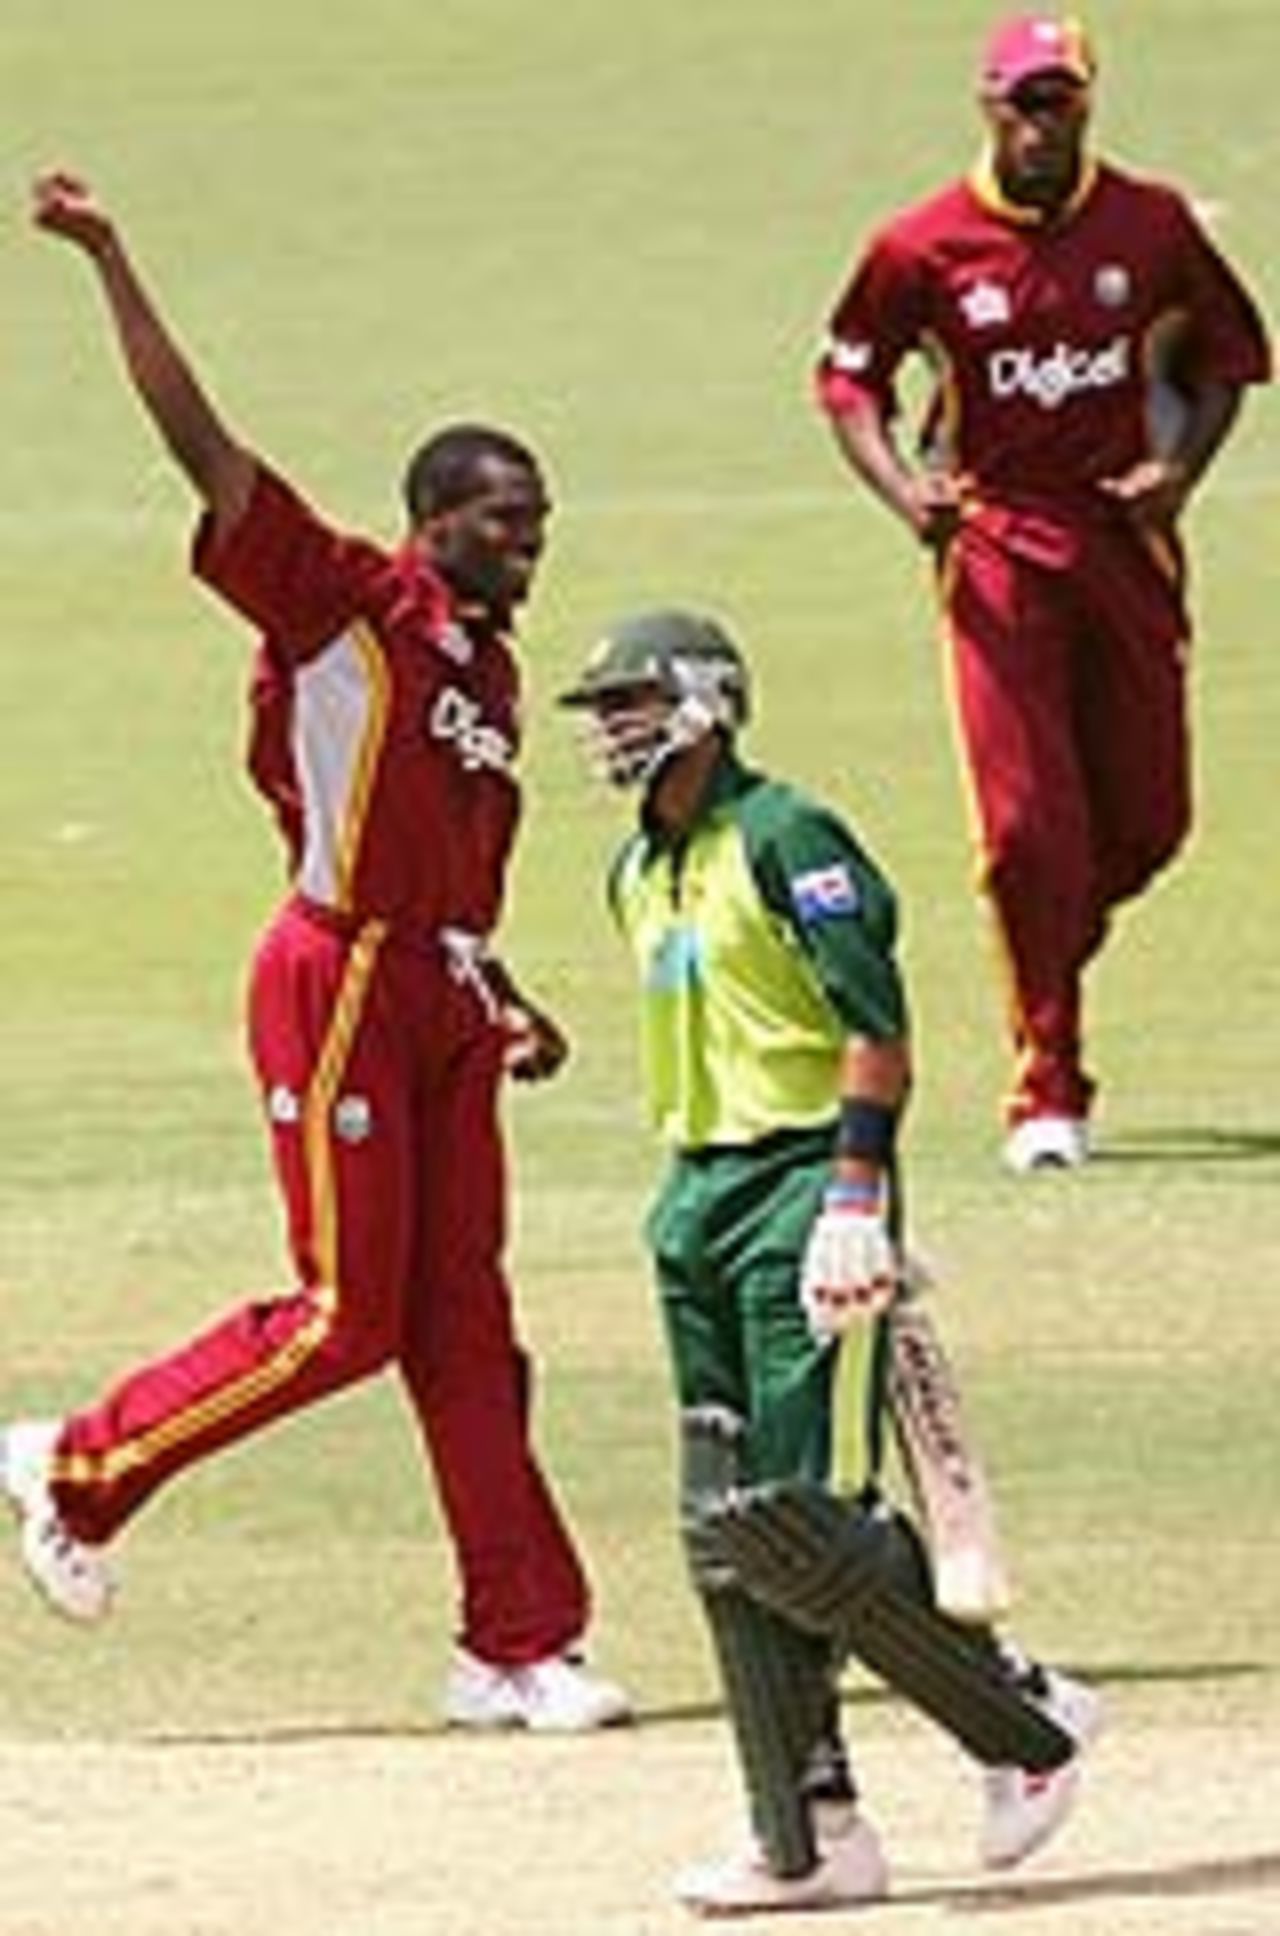 Reon King celebrates a wicket, West Indies v Pakistan, VB Series, Adelaide, January 28, 2005